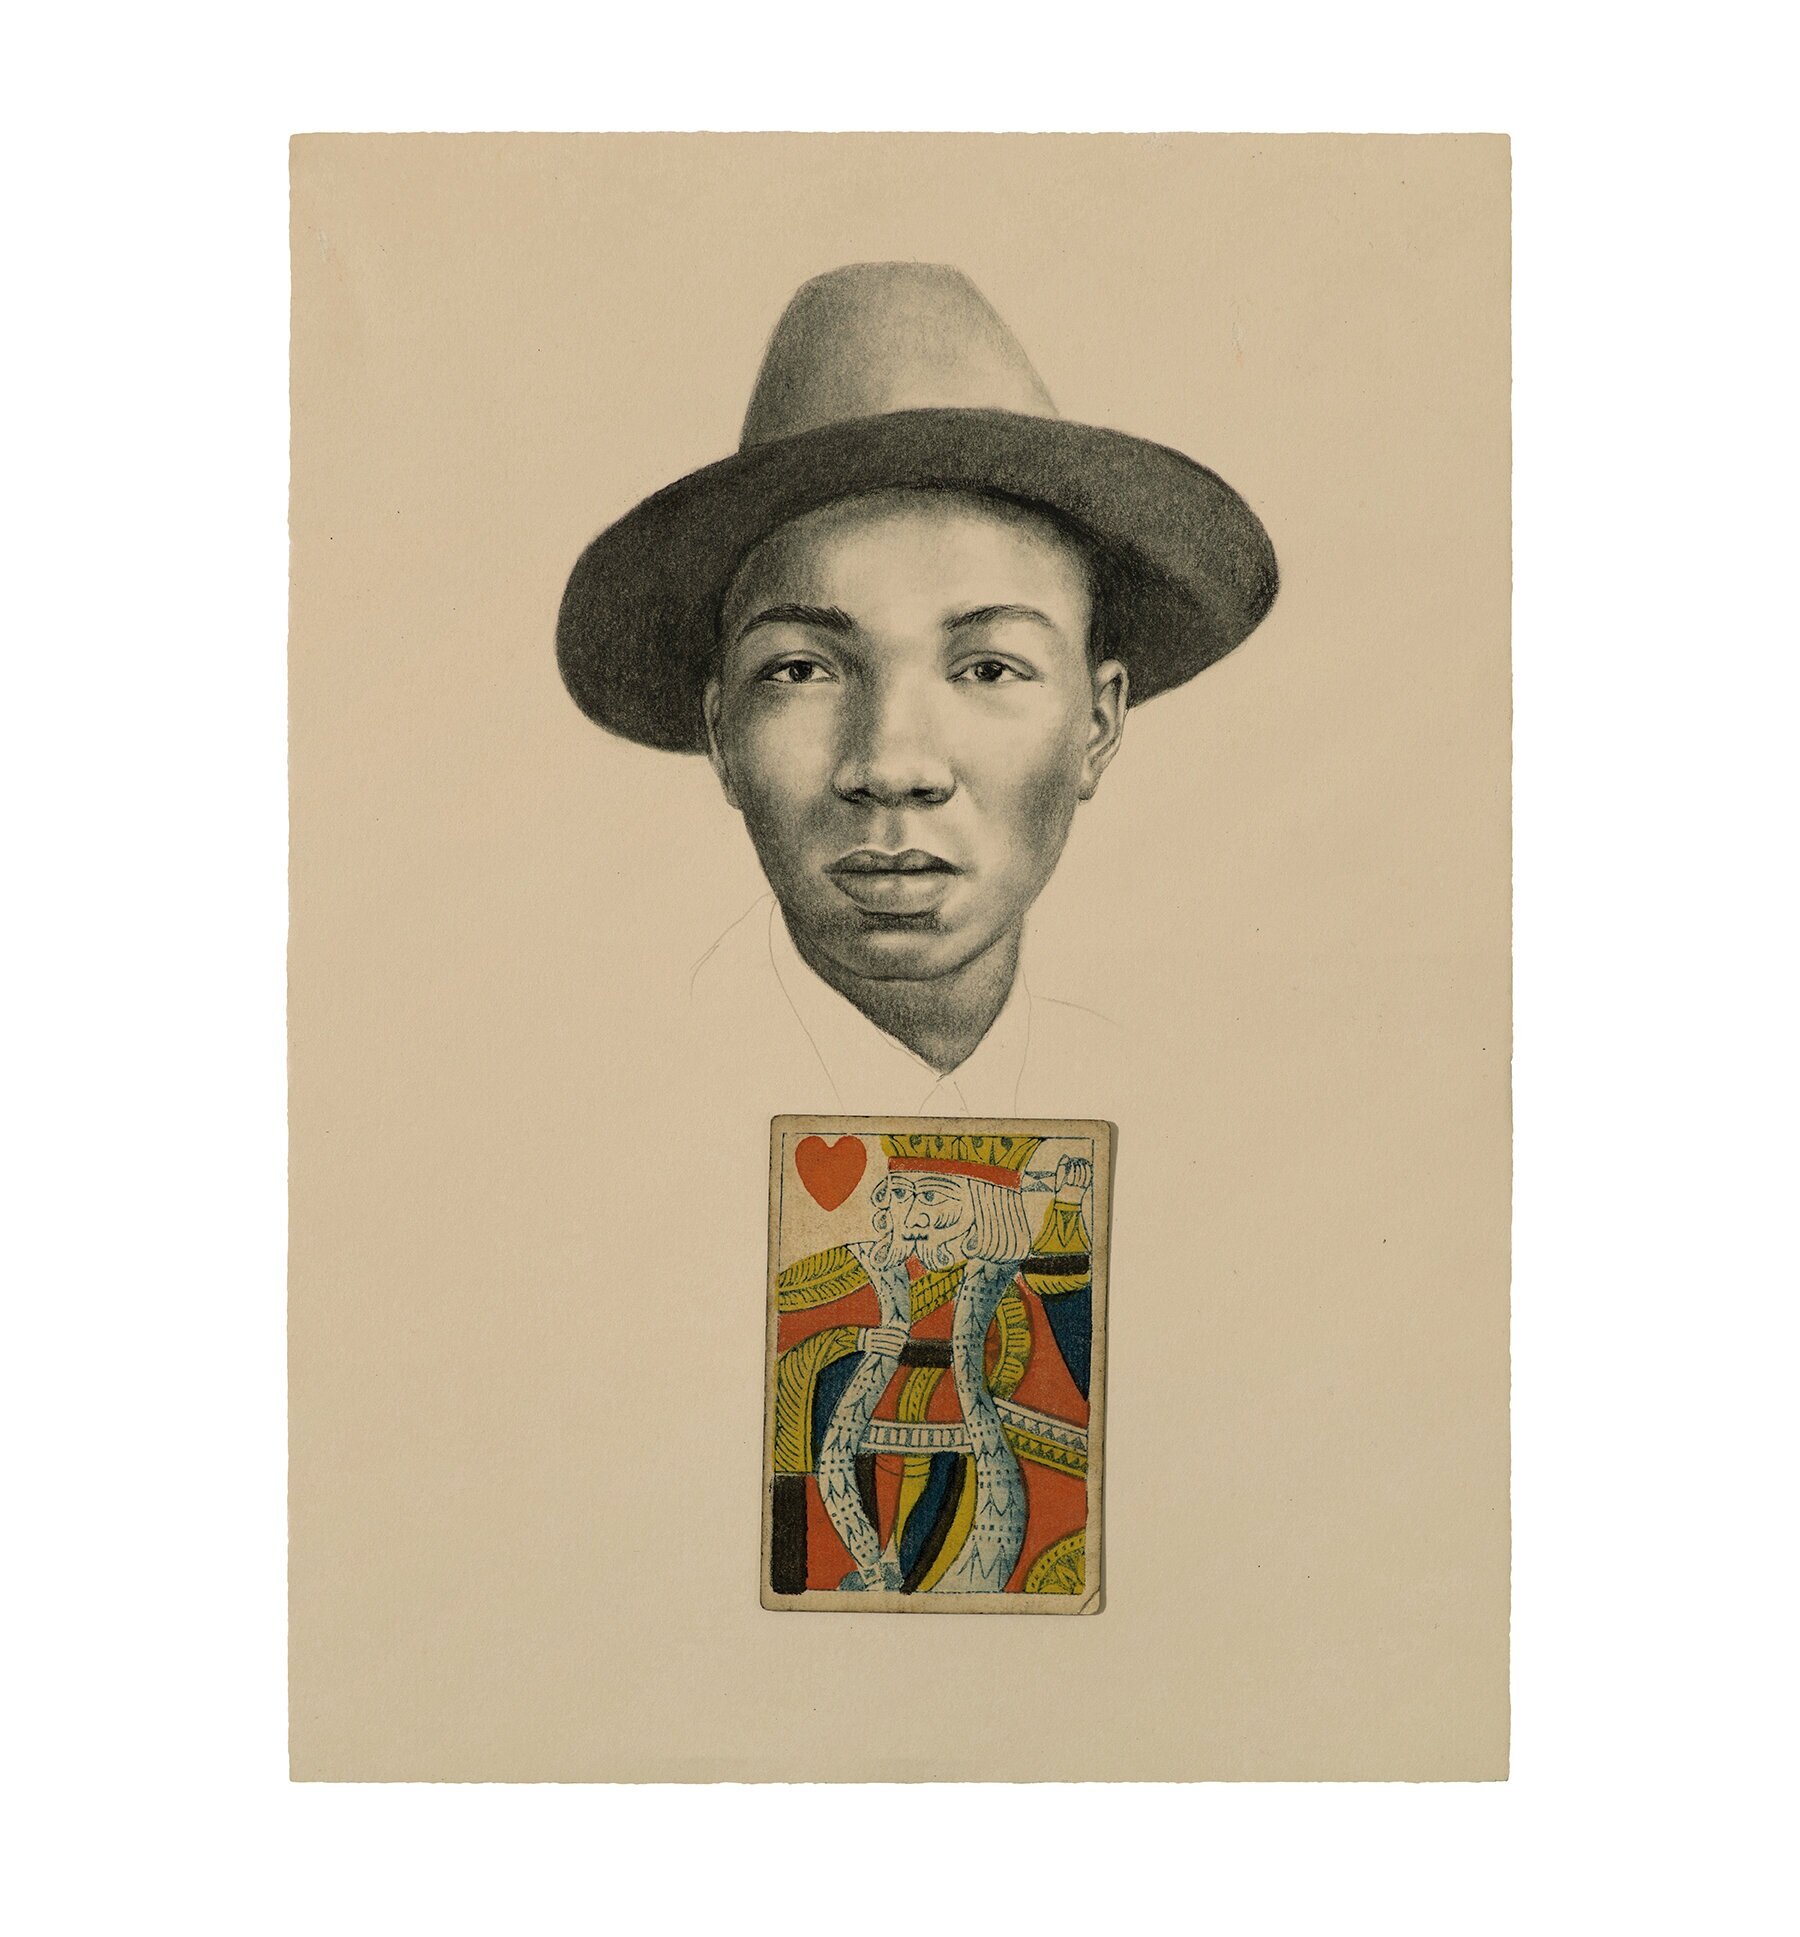  Whitfield Lovell.  The Card Pieces , 2020. Charcoal pencil on paper with attached playing card, 12 x 9 inches each. Courtesy of the artist and DC Moore Gallery, New York.  